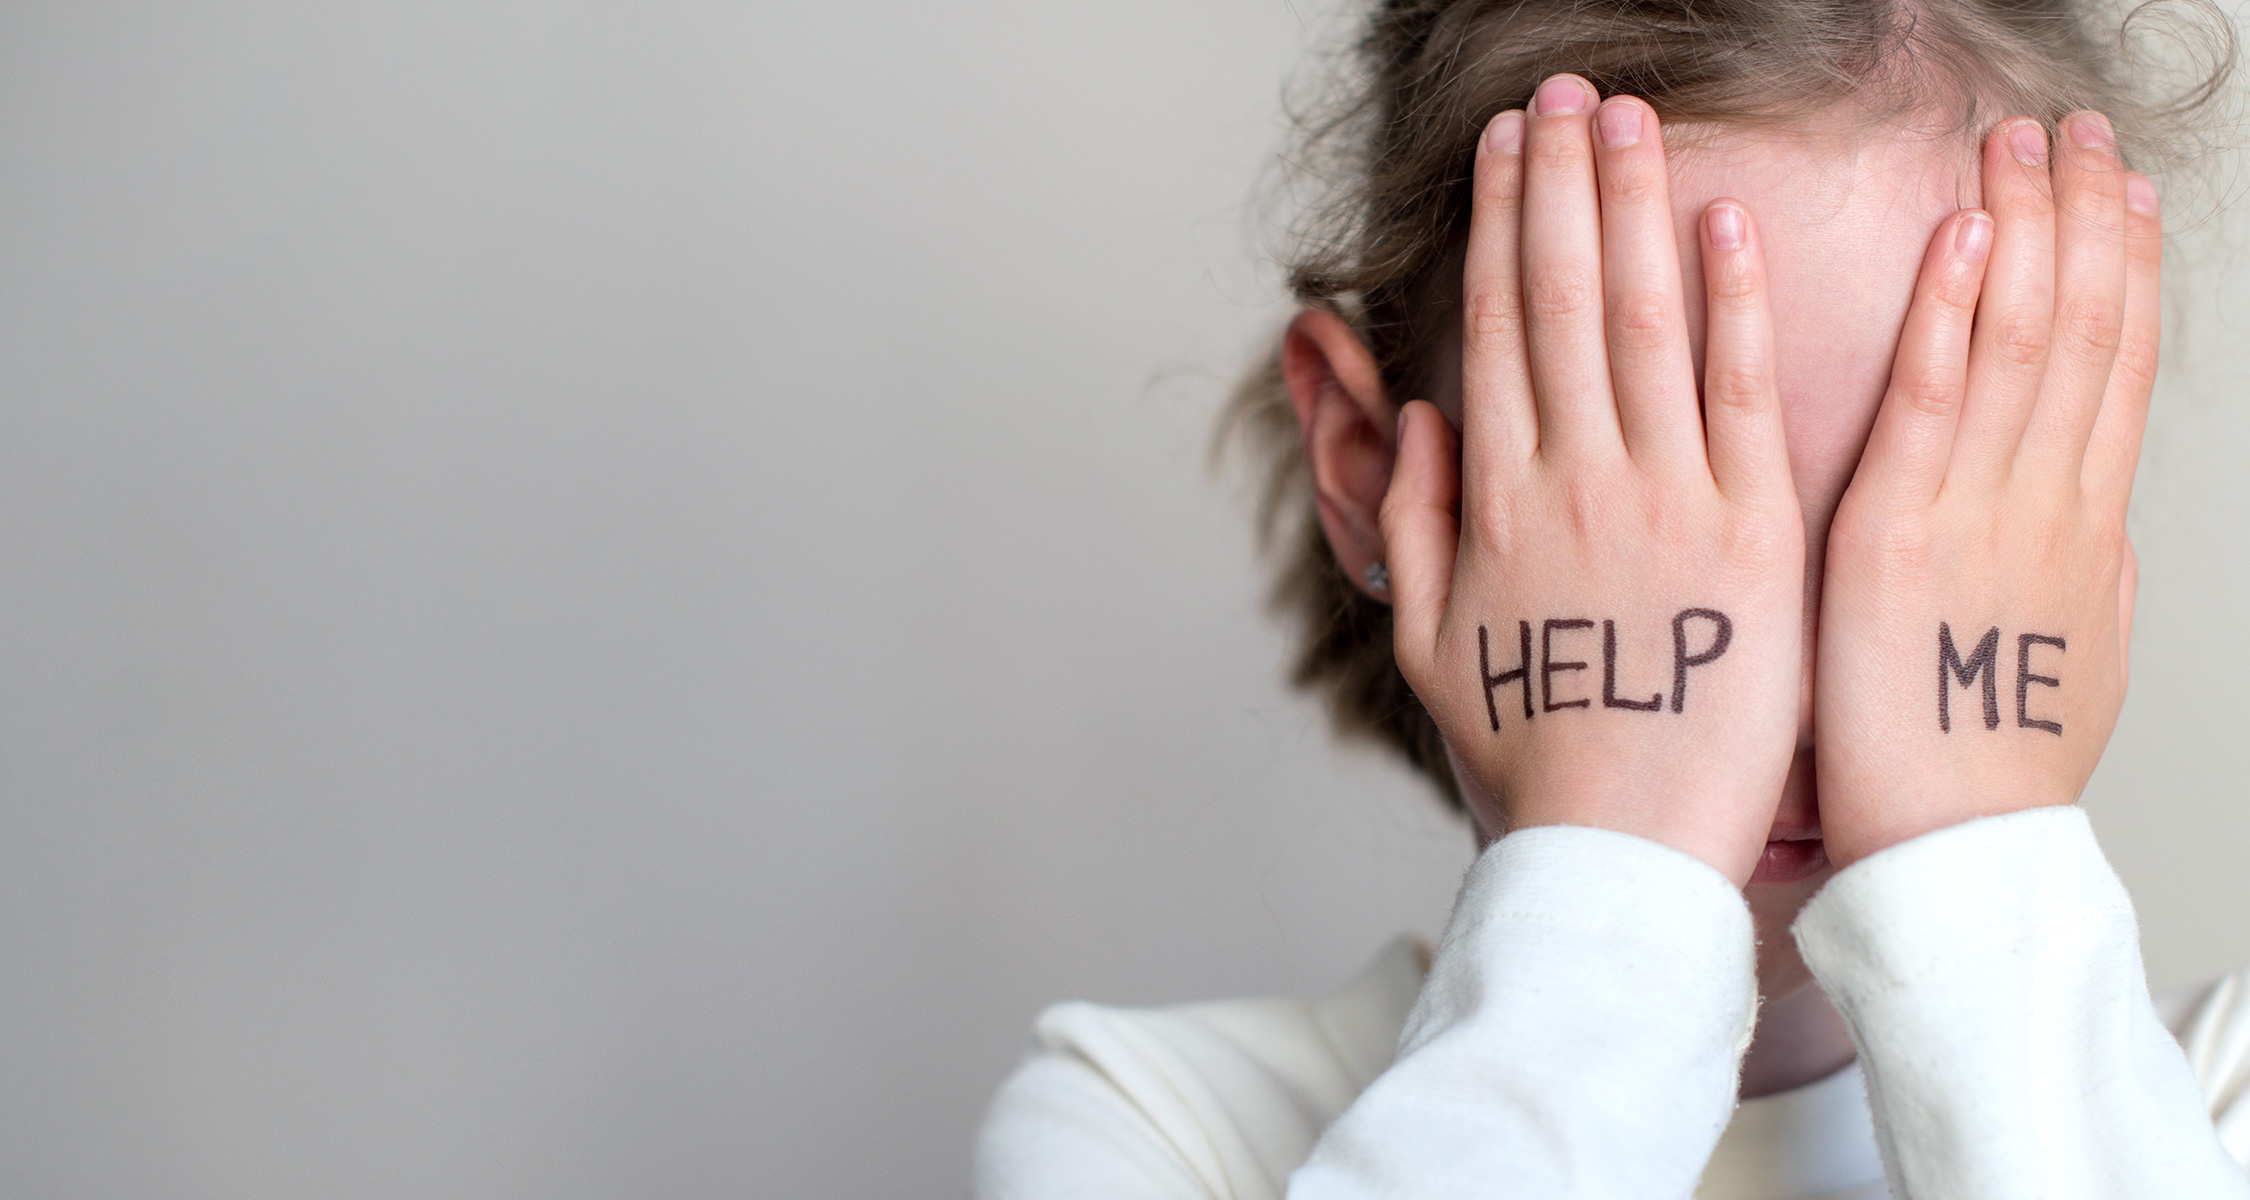 Girl holds her hands in front of her face that say "Help Me".